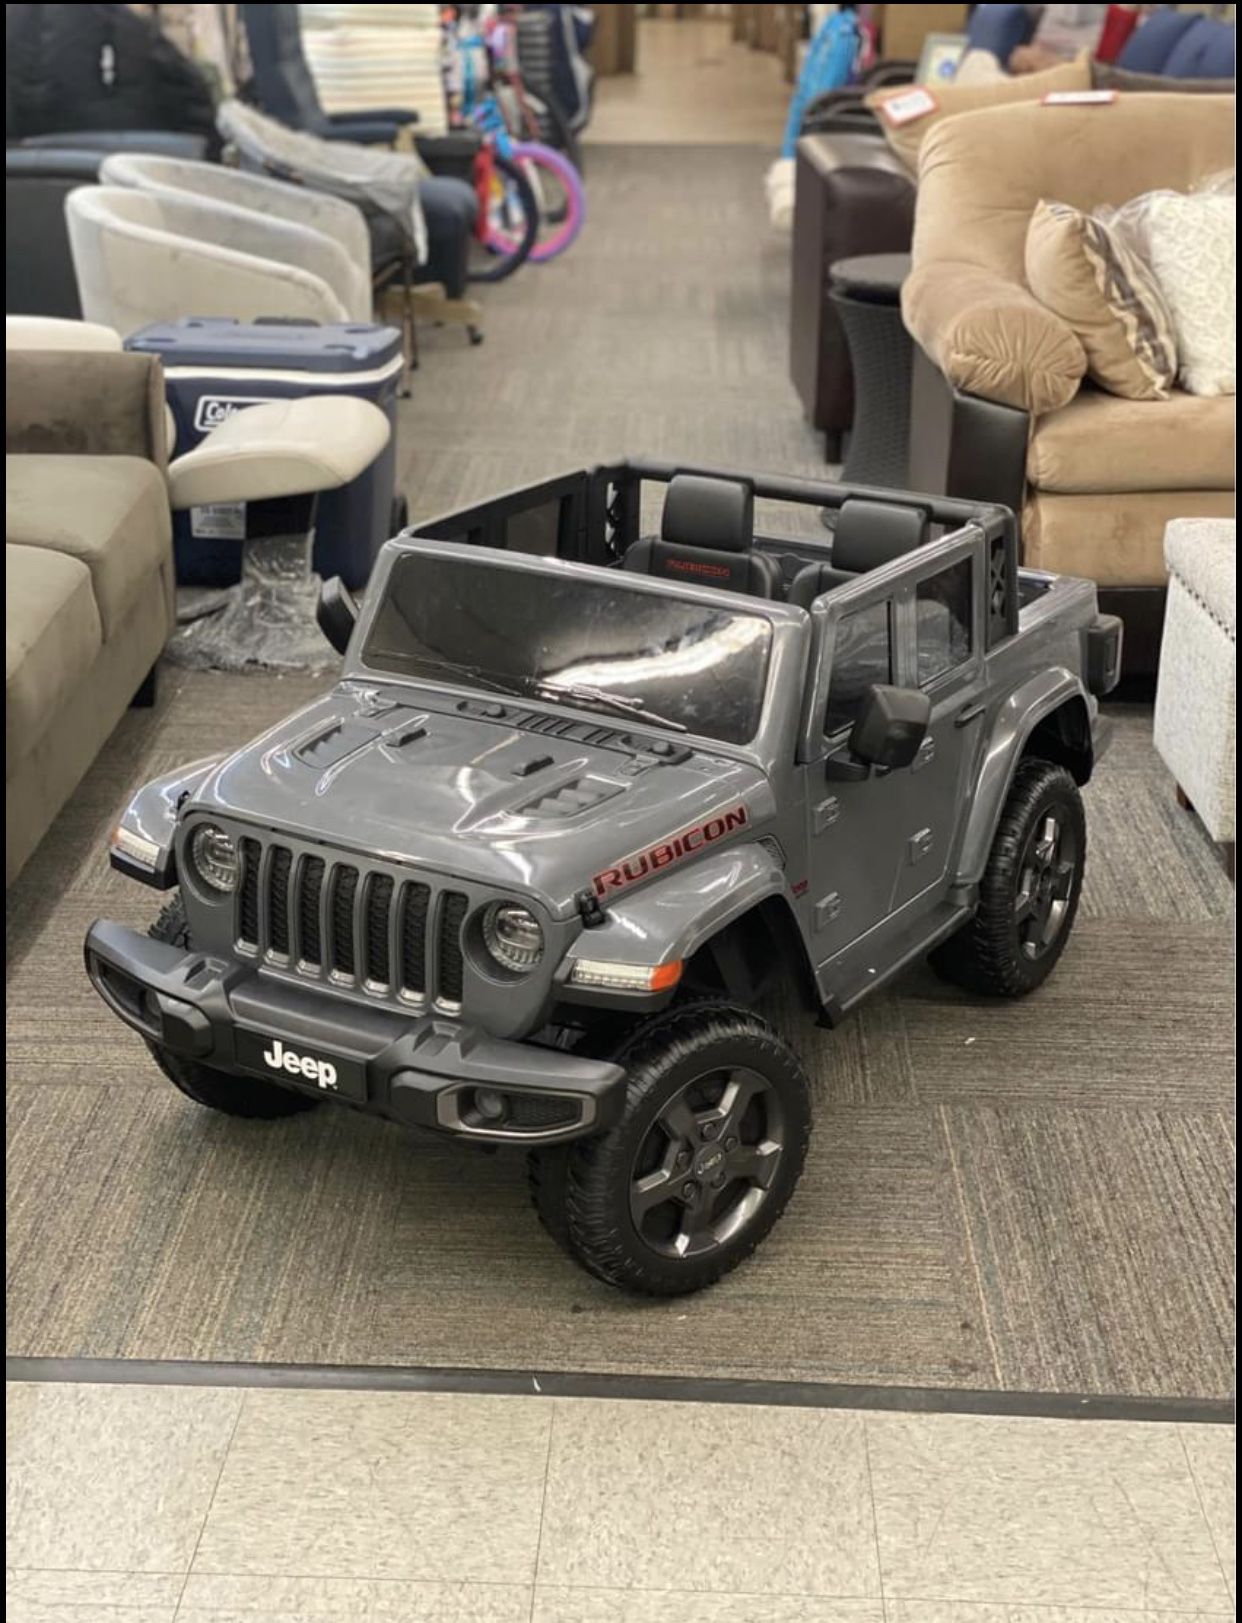 💫Brand New💫 12 volt Jeep Gladiator Battery Powered Ride On Vehicle, Gray